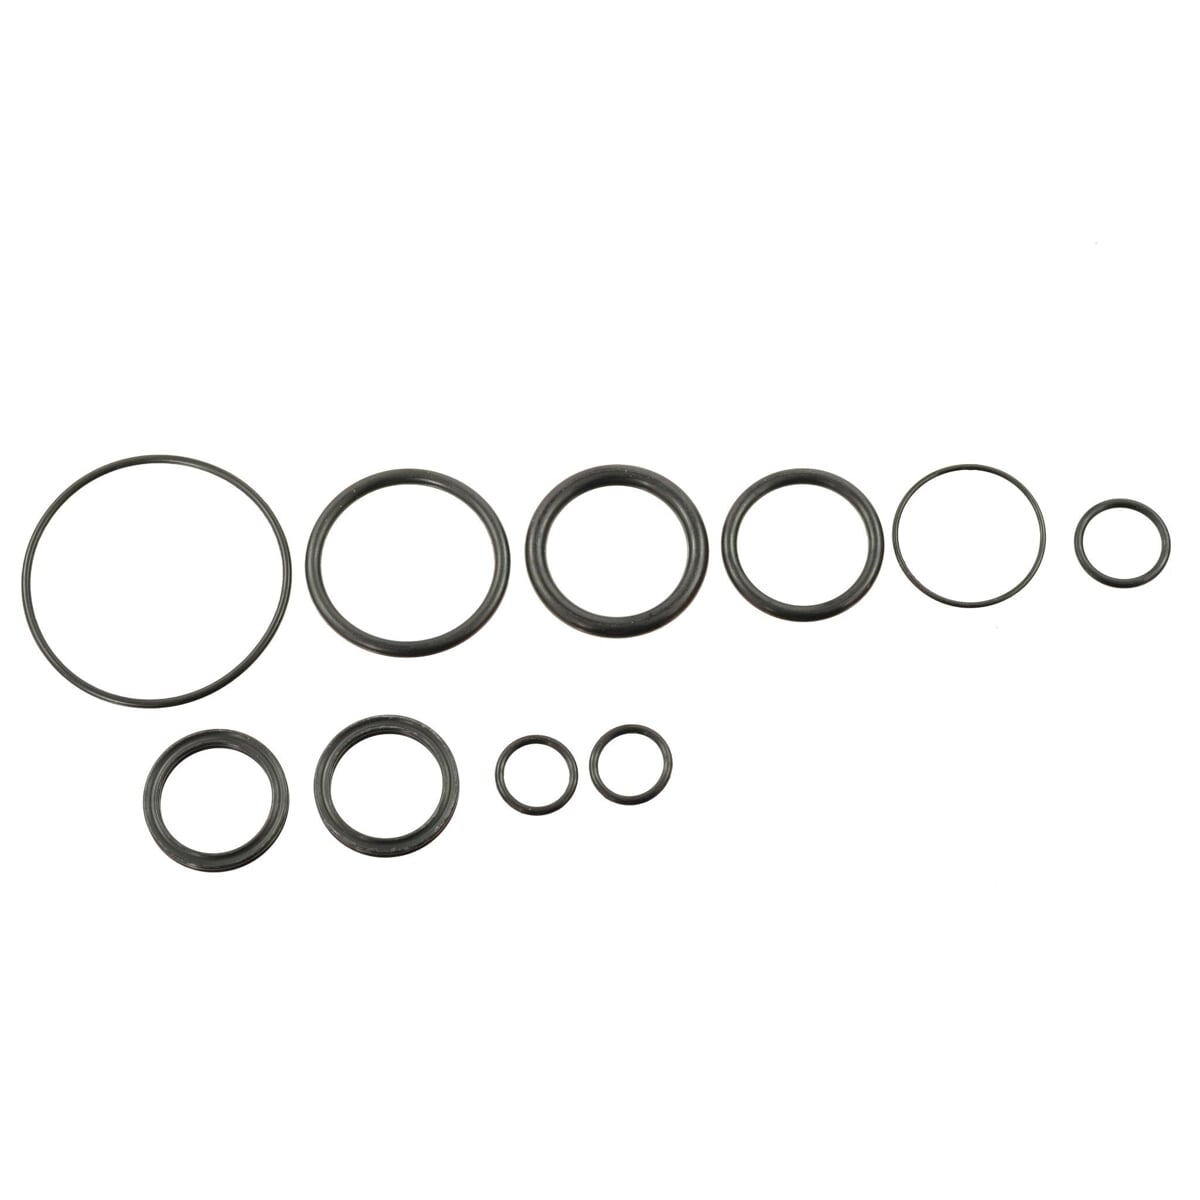 CANNONDALE SET LEFTY OPPO 100 HOUR SEALS (K57009)